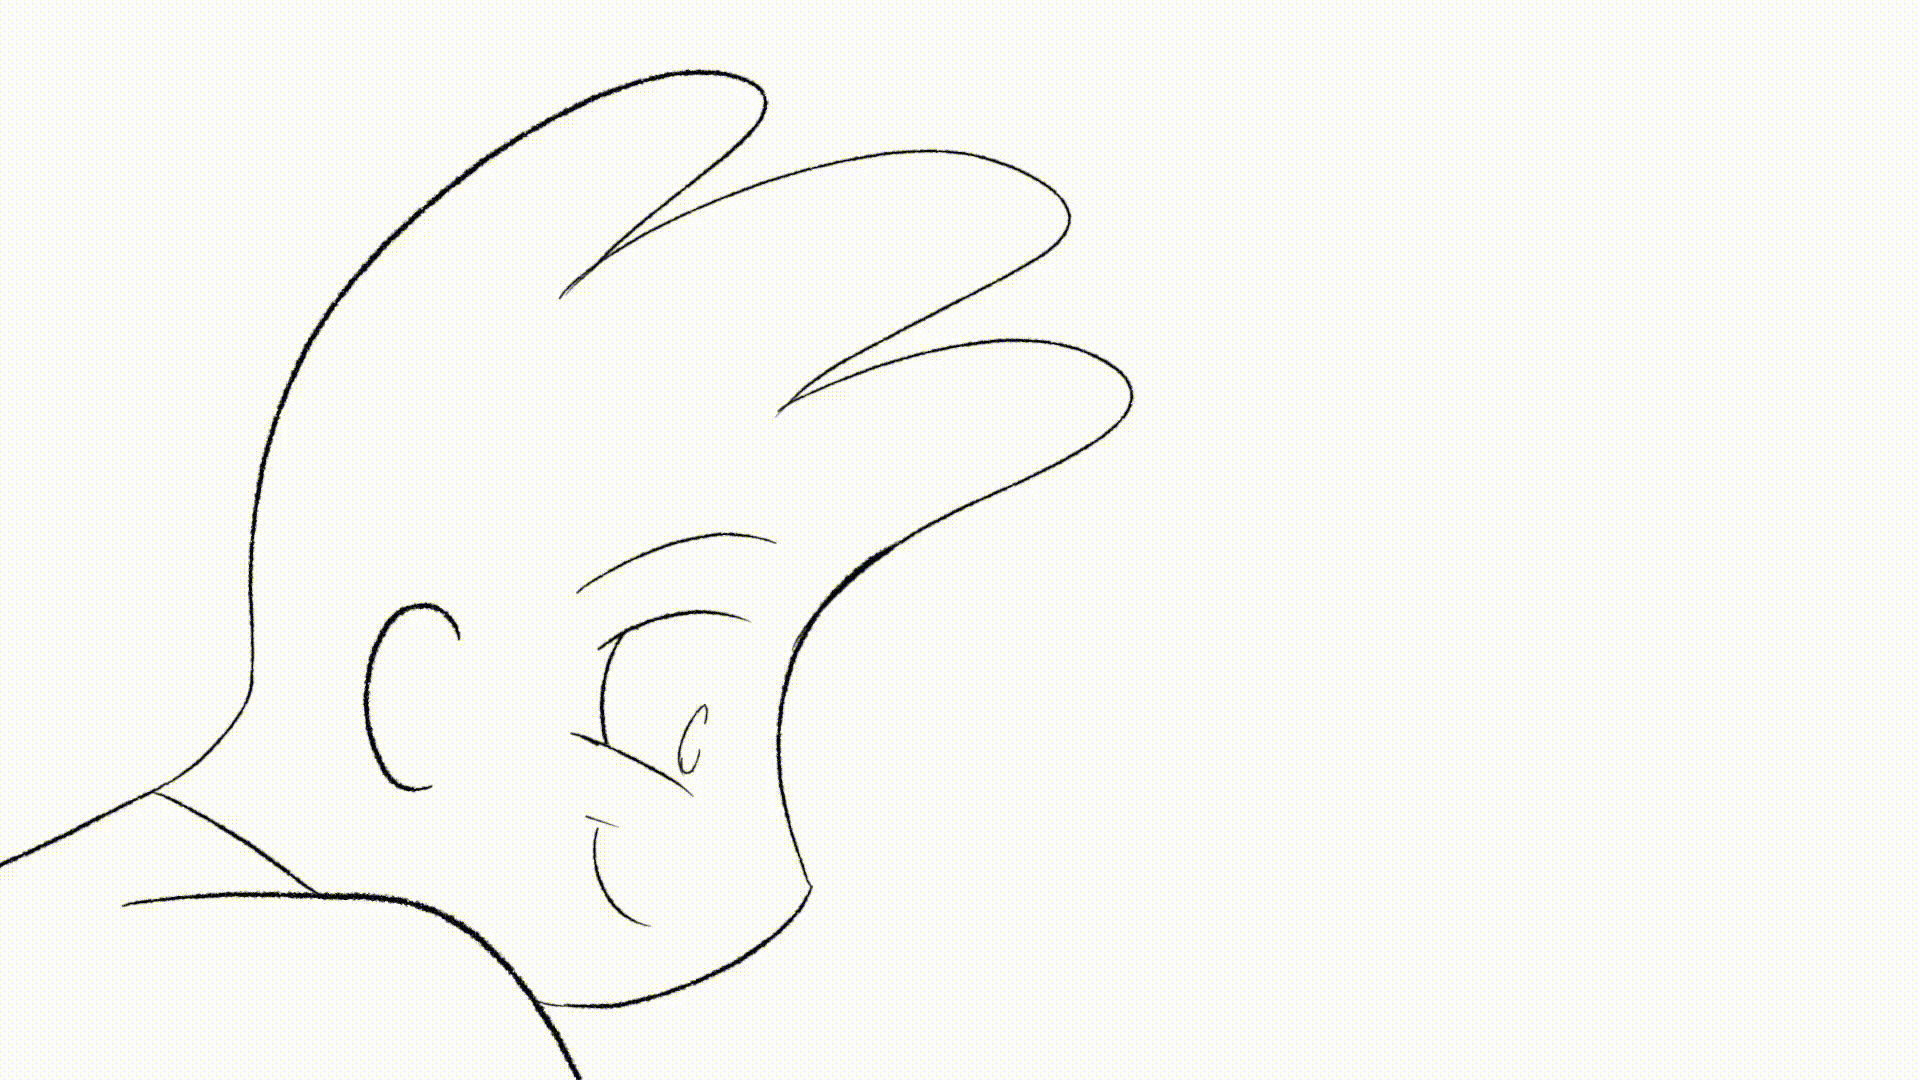 Brian thinking and sighing, animation test for 'Invisible' by PhillipFPGA, 2019